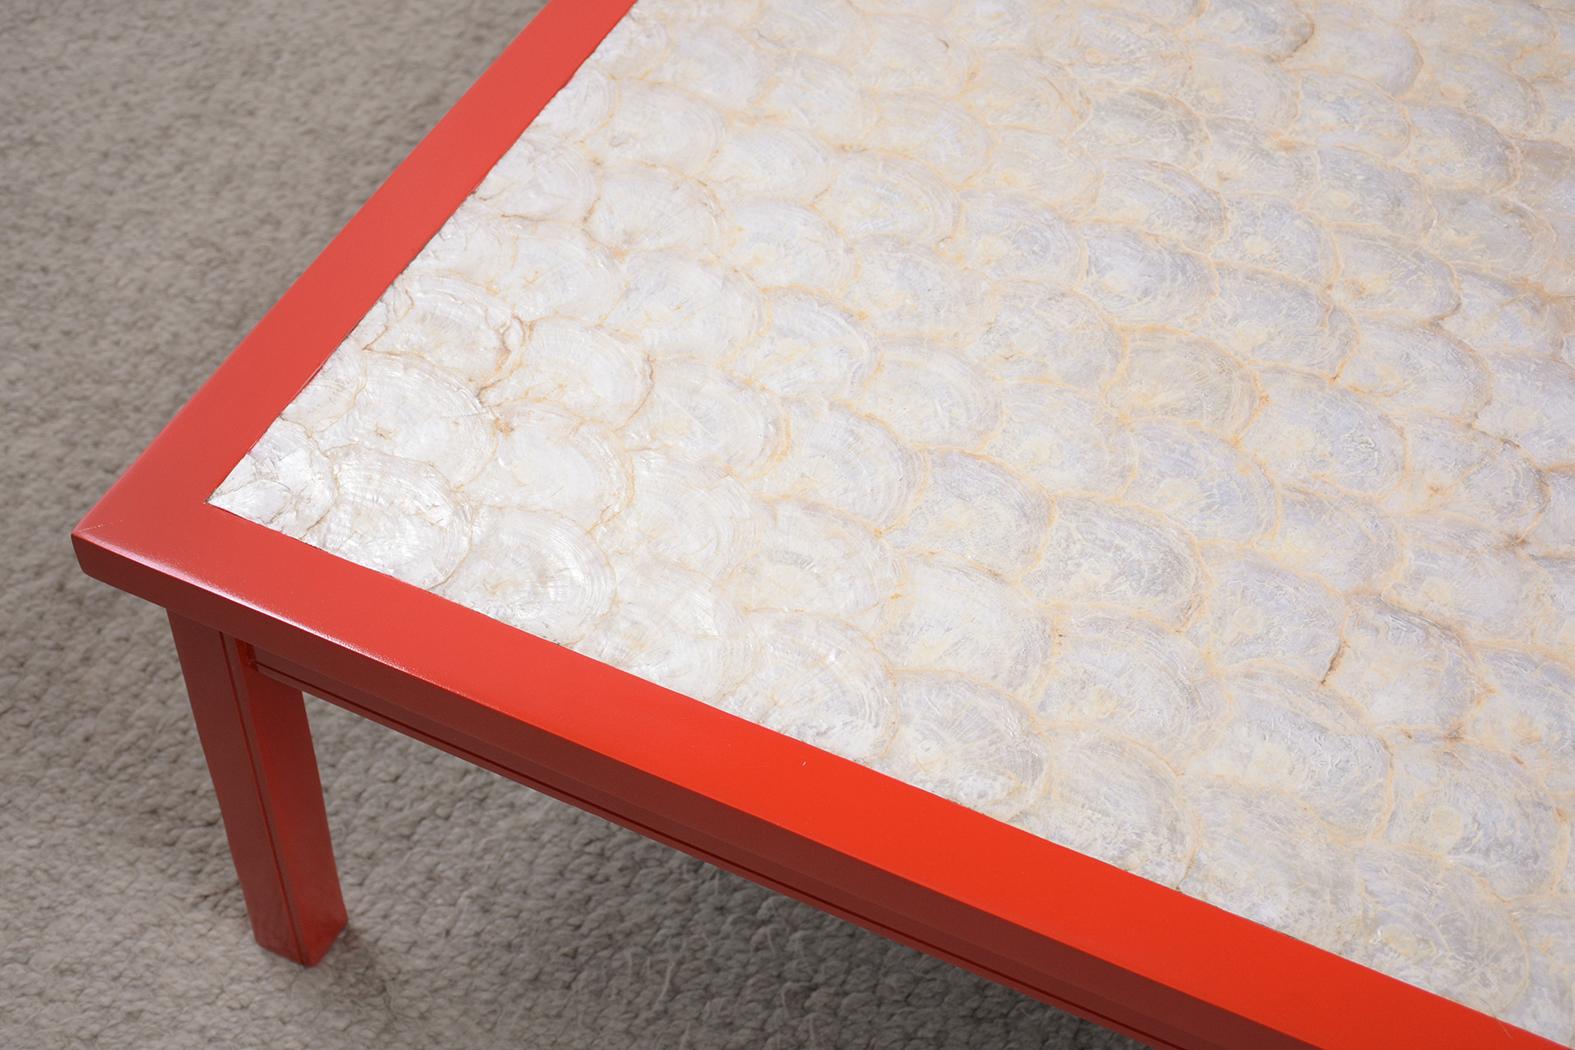 Vibrant Red Mid-Century Modern Coffee Table with Mother-of-Pearl Veneer For Sale 1